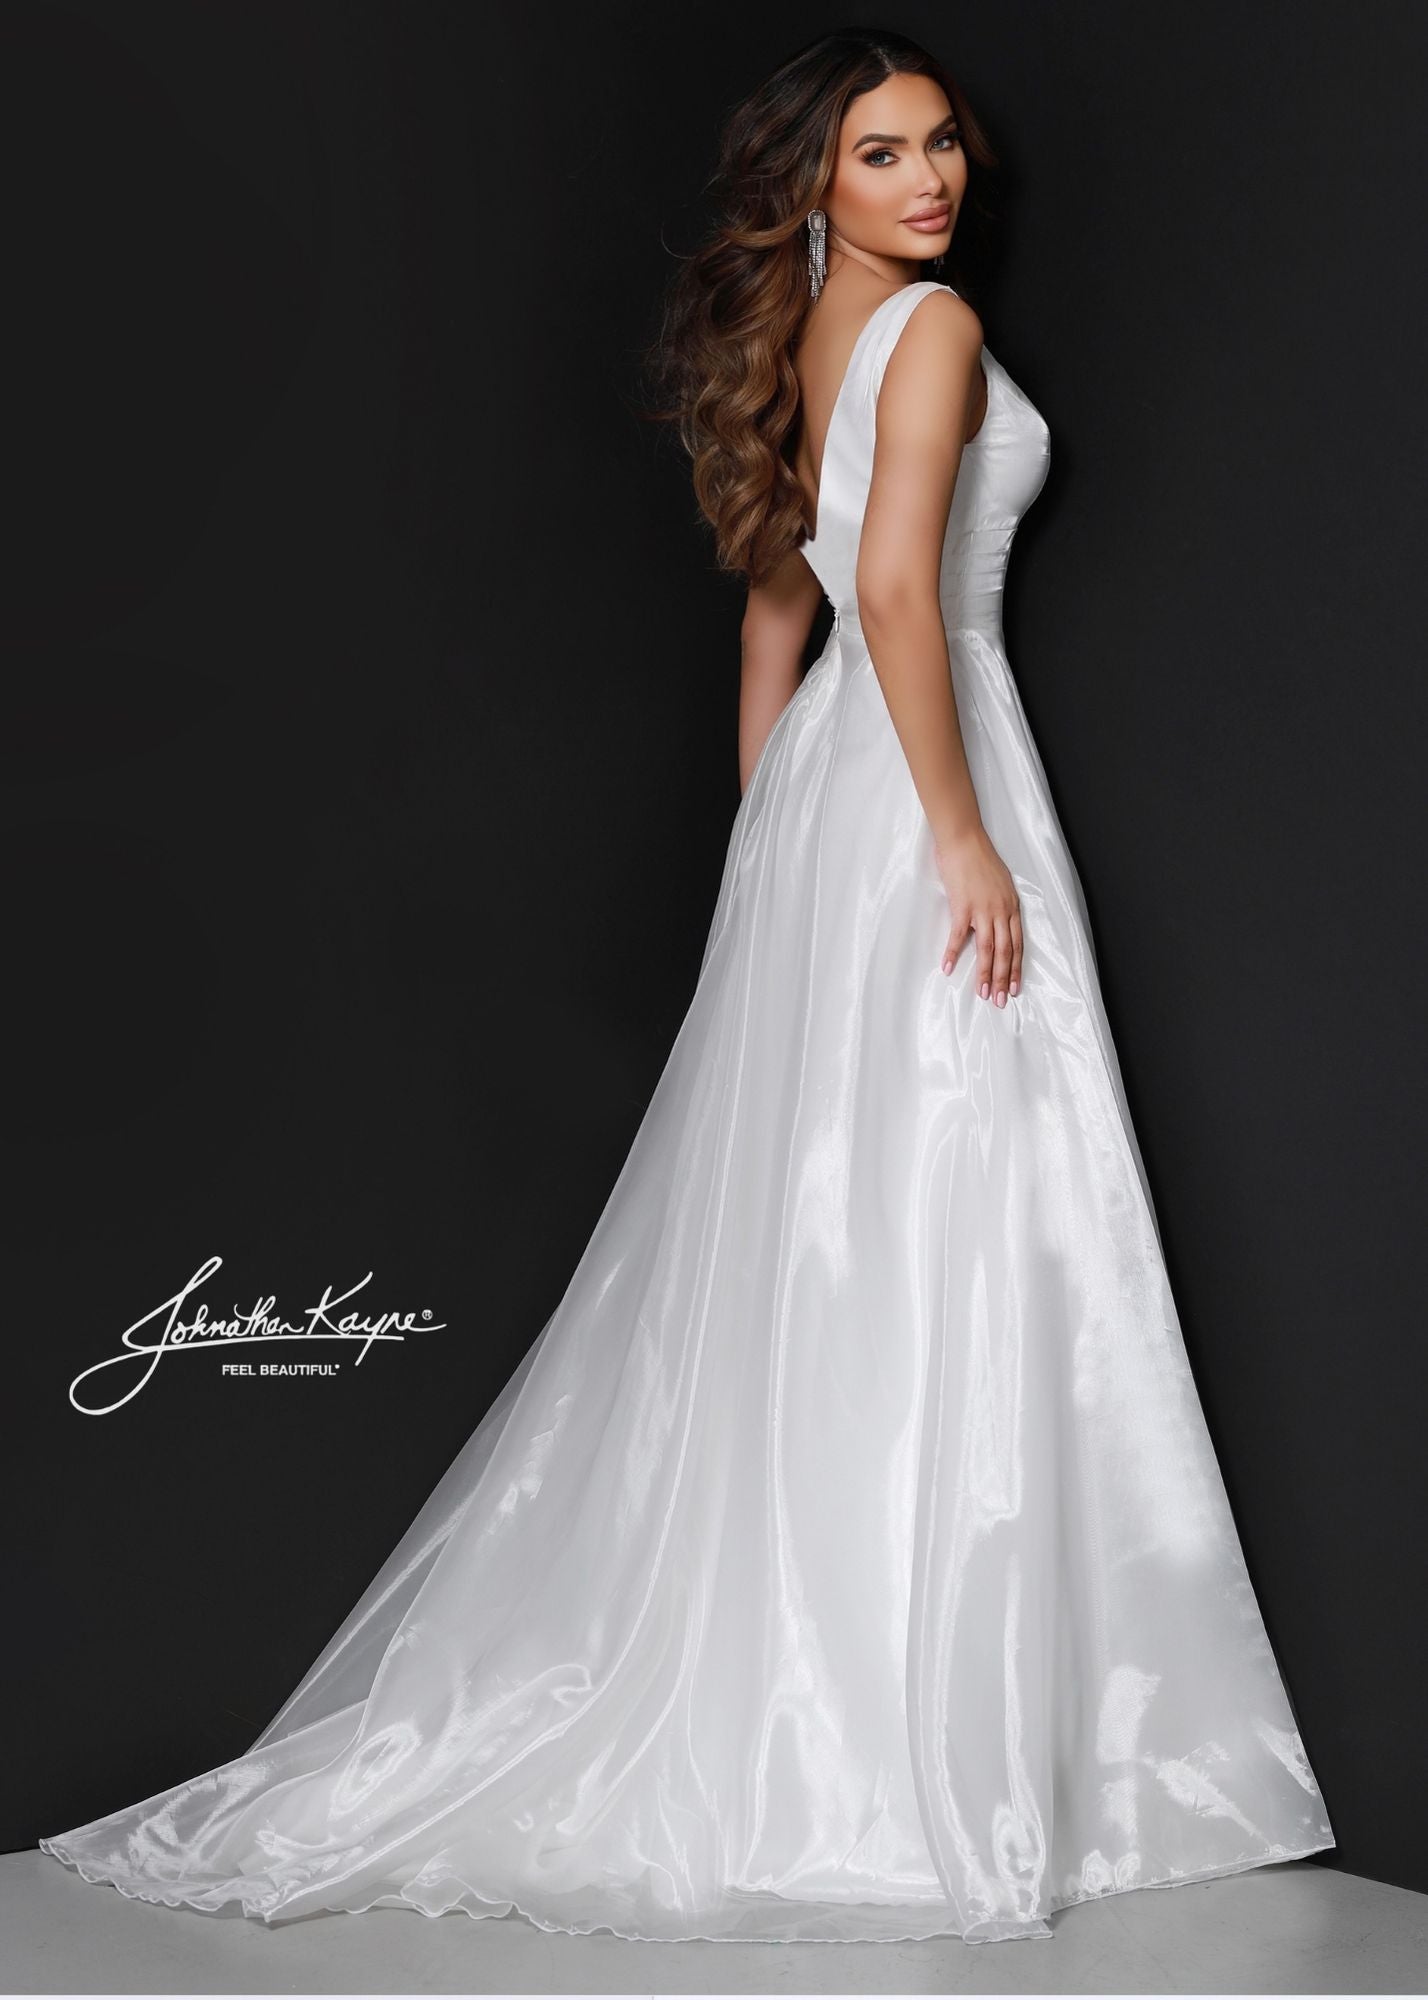 Johnathan Kayne's 2538 wedding dress is the perfect destination bridal gown for the modern bride. The sleek A-line fit, V-neck, and slit create a stylish and timeless look. This piece is sure to make a statement.  Size: 0, 14  Color: White